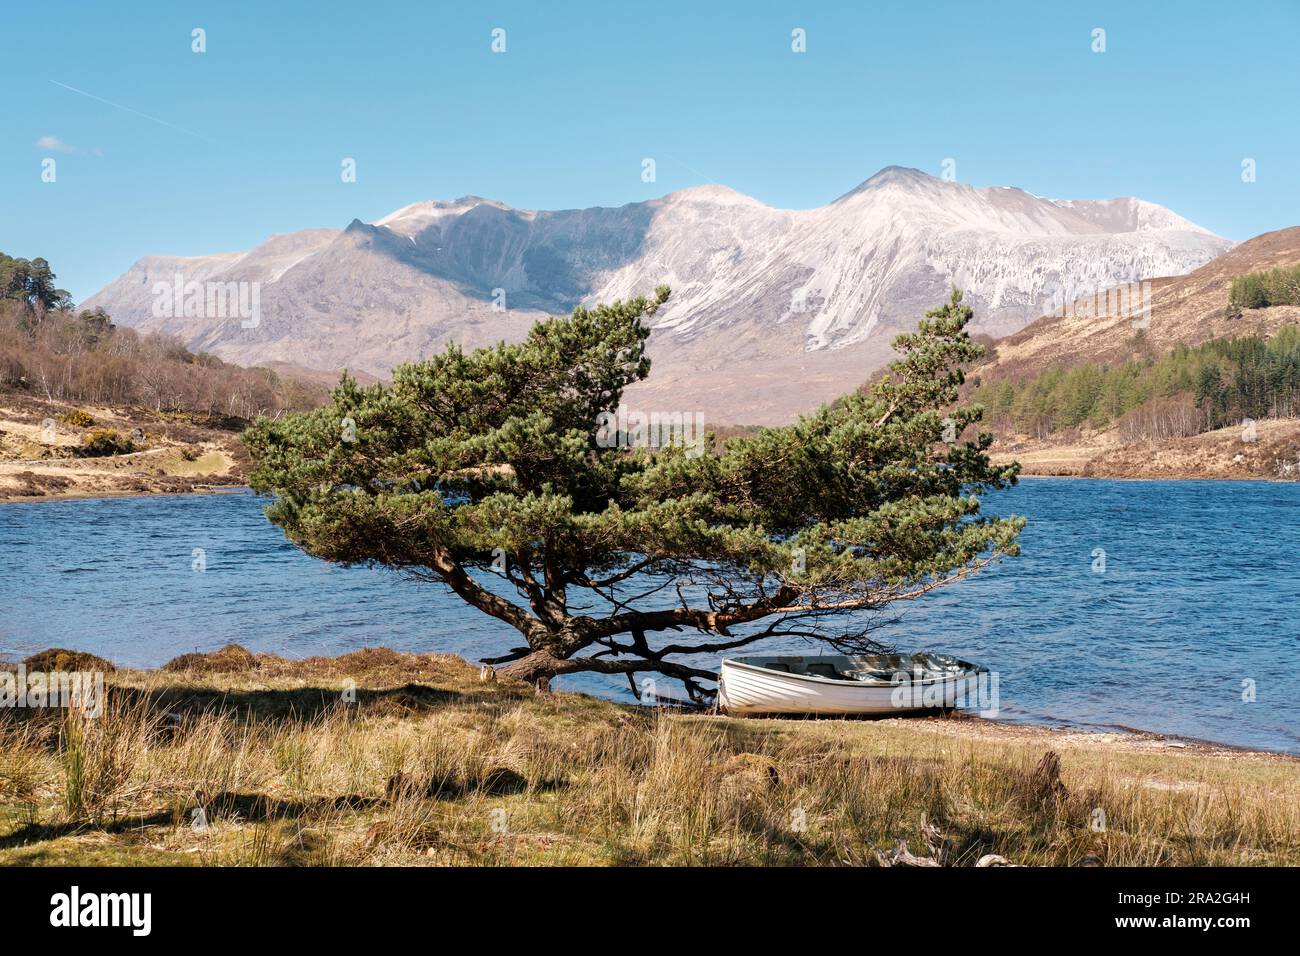 Rowing boat moored under a tree at Loch Coulin In the Torridon area of the North West Highlands of Scotland.  Beinn Eighe in the background. Stock Photo